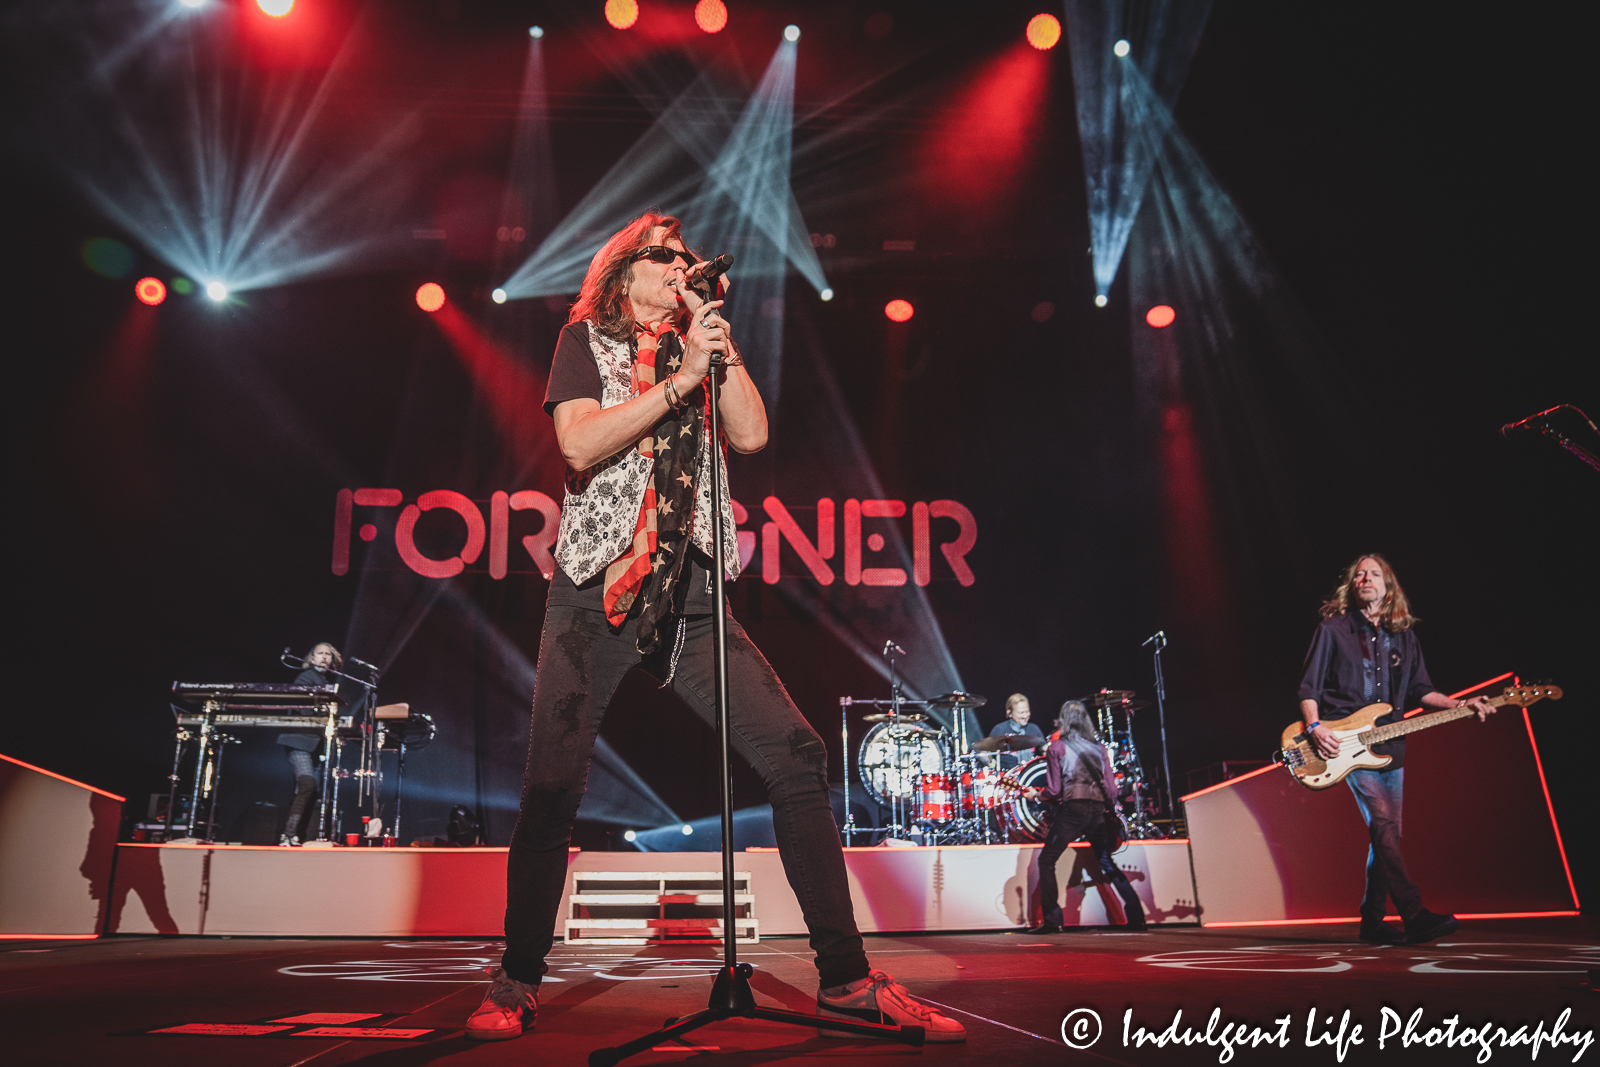 Lead singer Kelly Hansen performing "Double Vision" with his band Foreigner at Hartman Arena in Park City, KS on April 30, 2023.